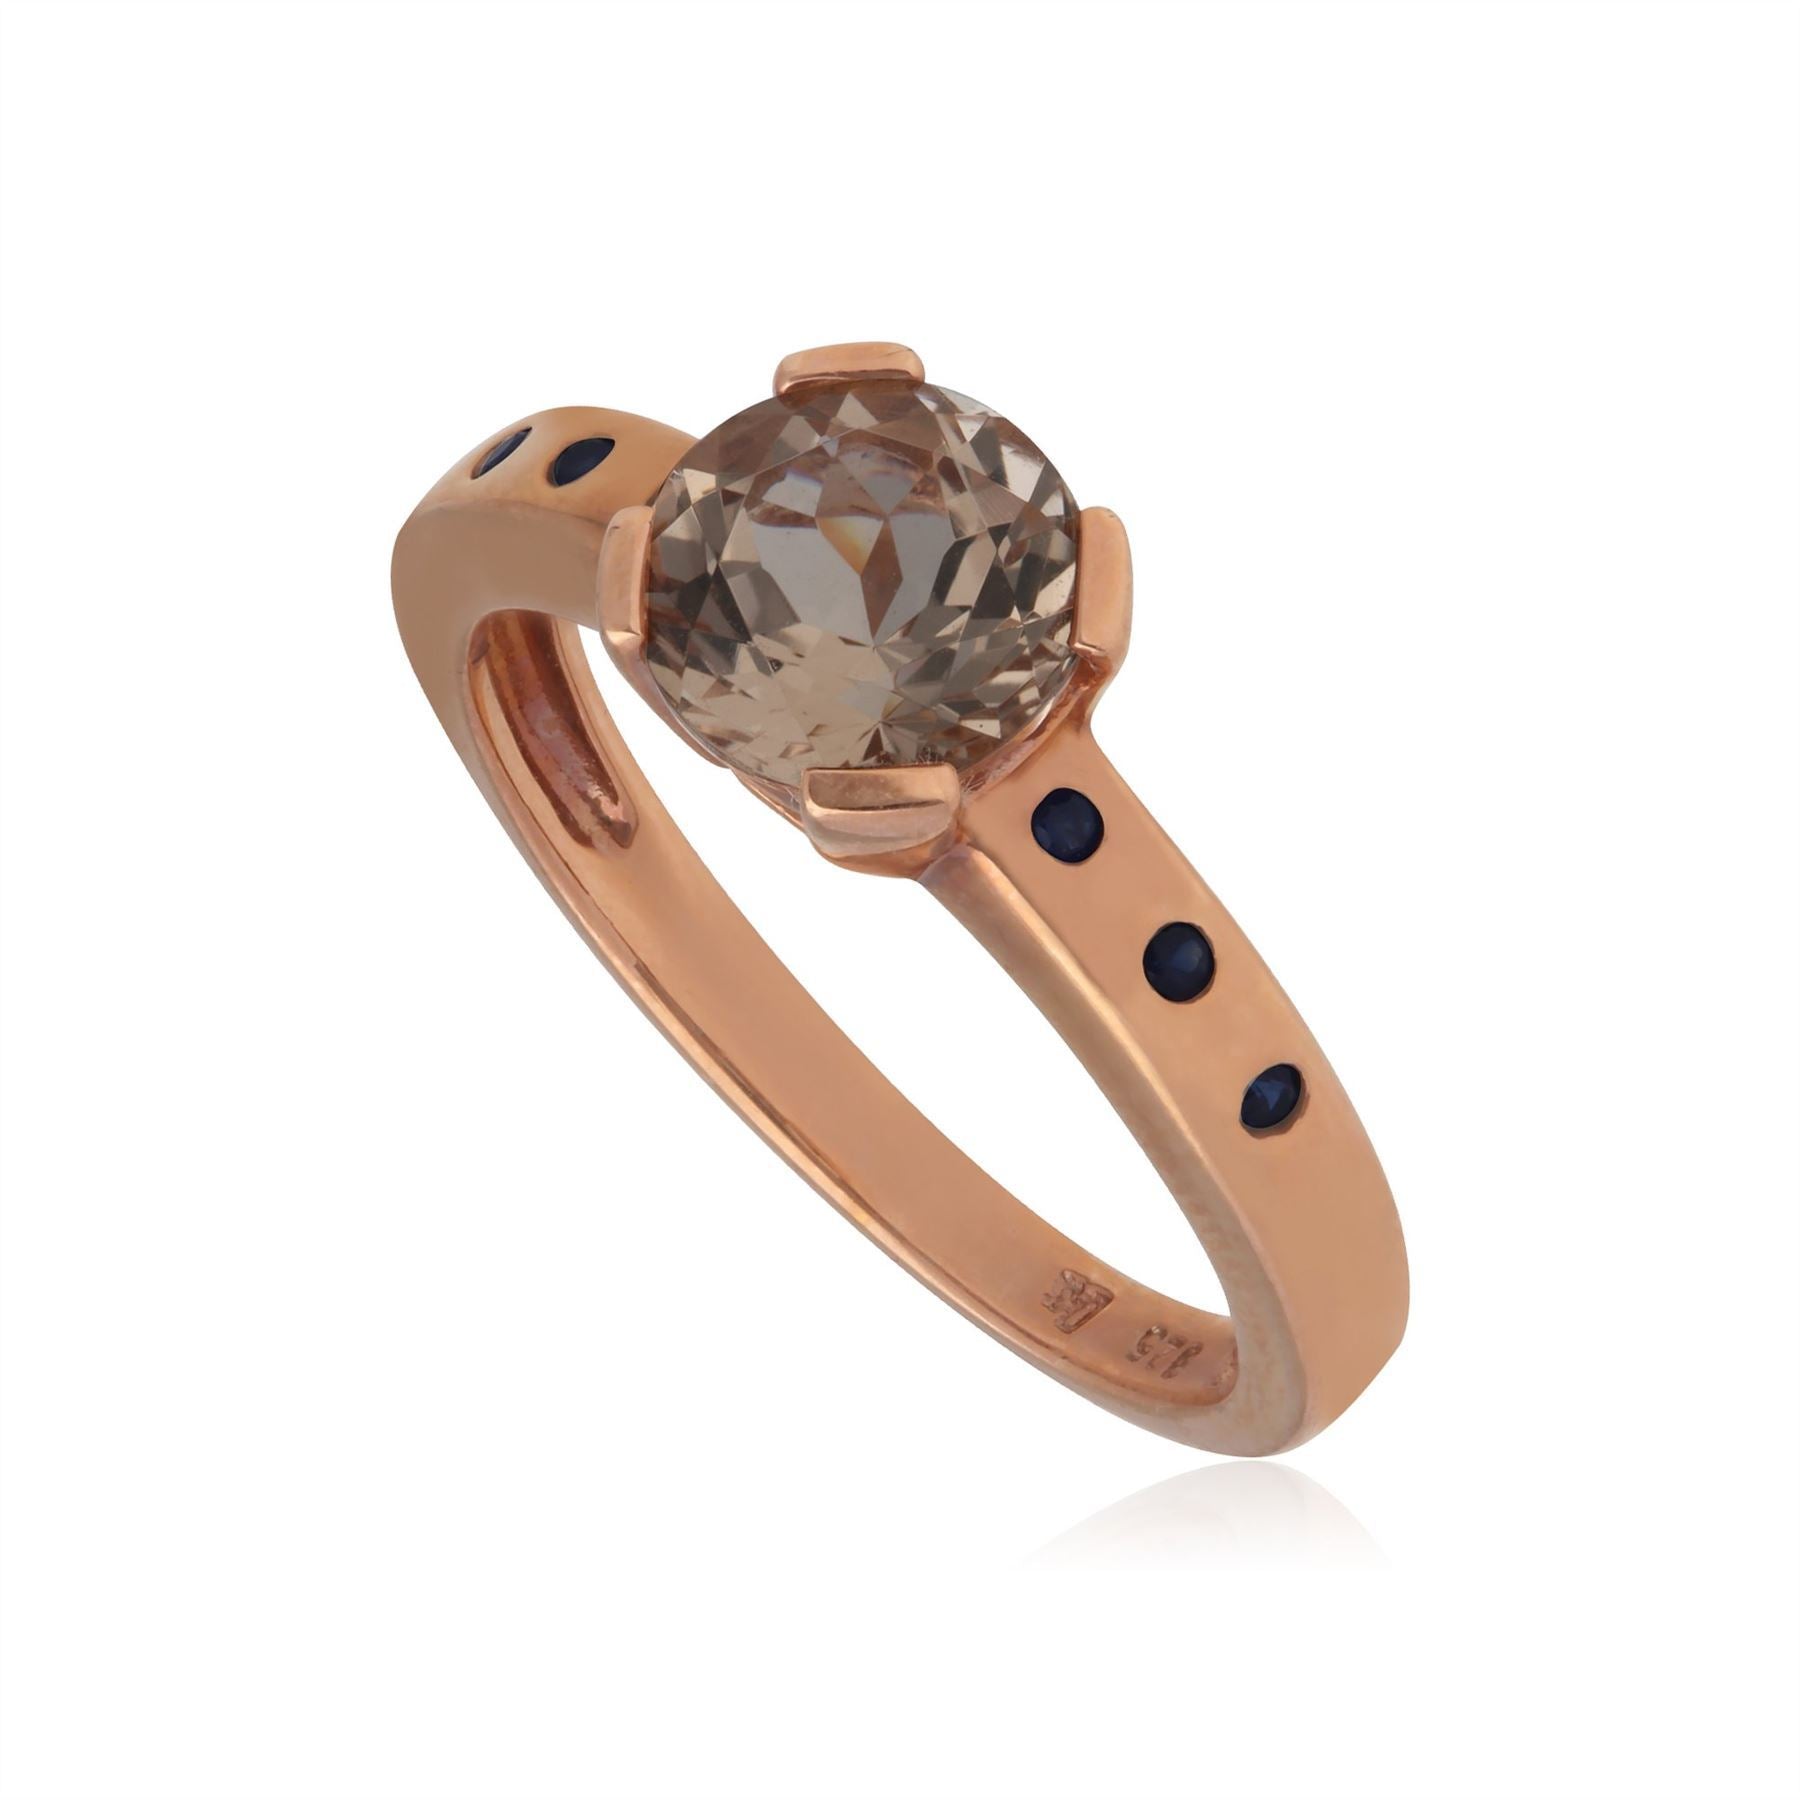 Kosmos Morganite Cocktail Ring in Rose Gold Plated Sterling Silver